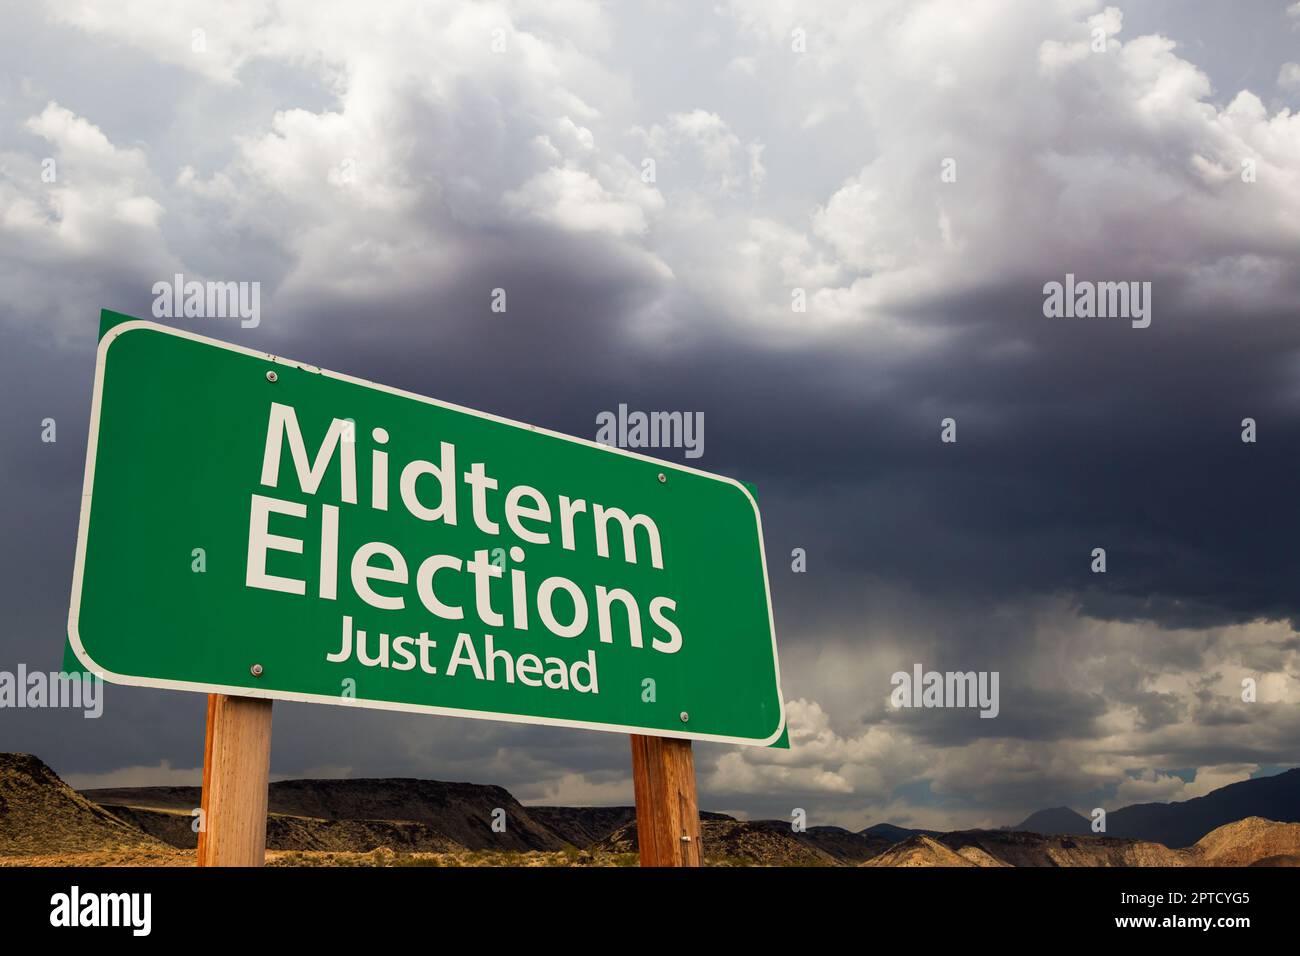 Midterm Elections Green Road Sign Over Dramatic Clouds and Sky. Stock Photo